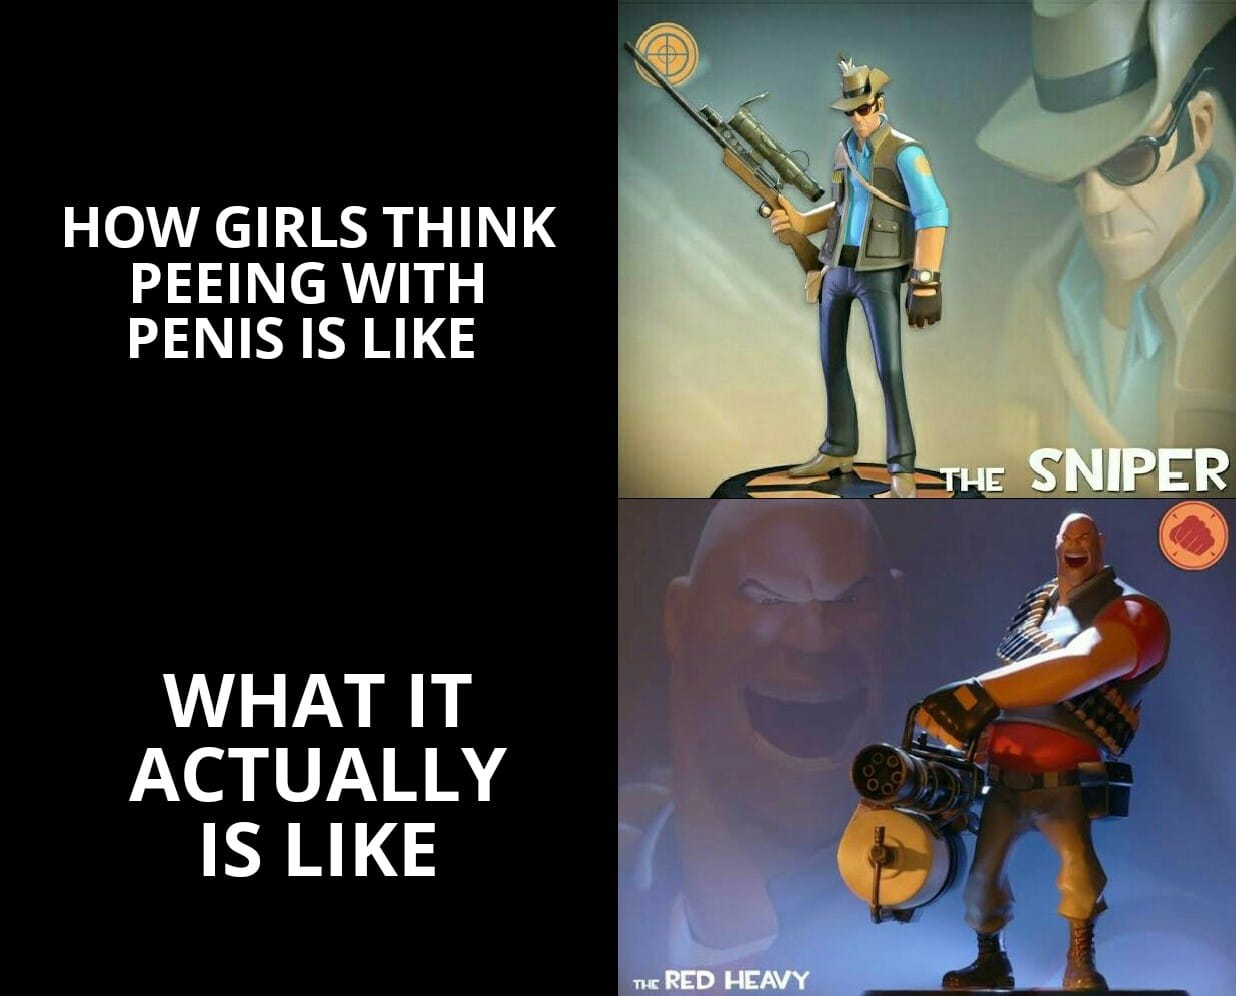 Dank, Heavy Dank Memes Dank, Heavy text: HOW GIRLS THINK PEEING WITH PENIS IS LIKE WSNIPER WHAT IT ACTUALLY IS LIKE RED HEAVY 